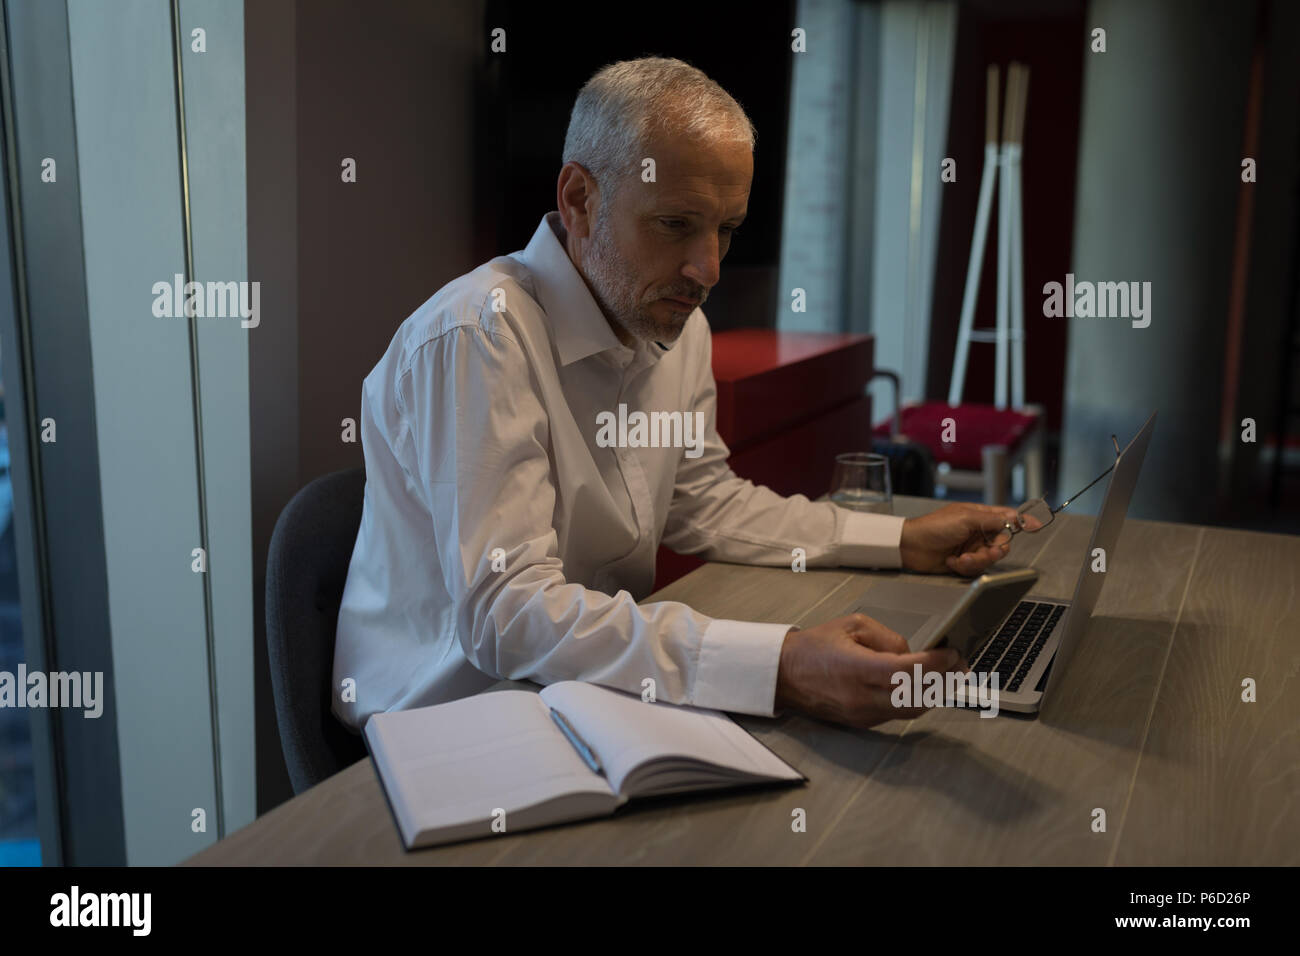 Businessman using mobile phone while working on laptop Banque D'Images